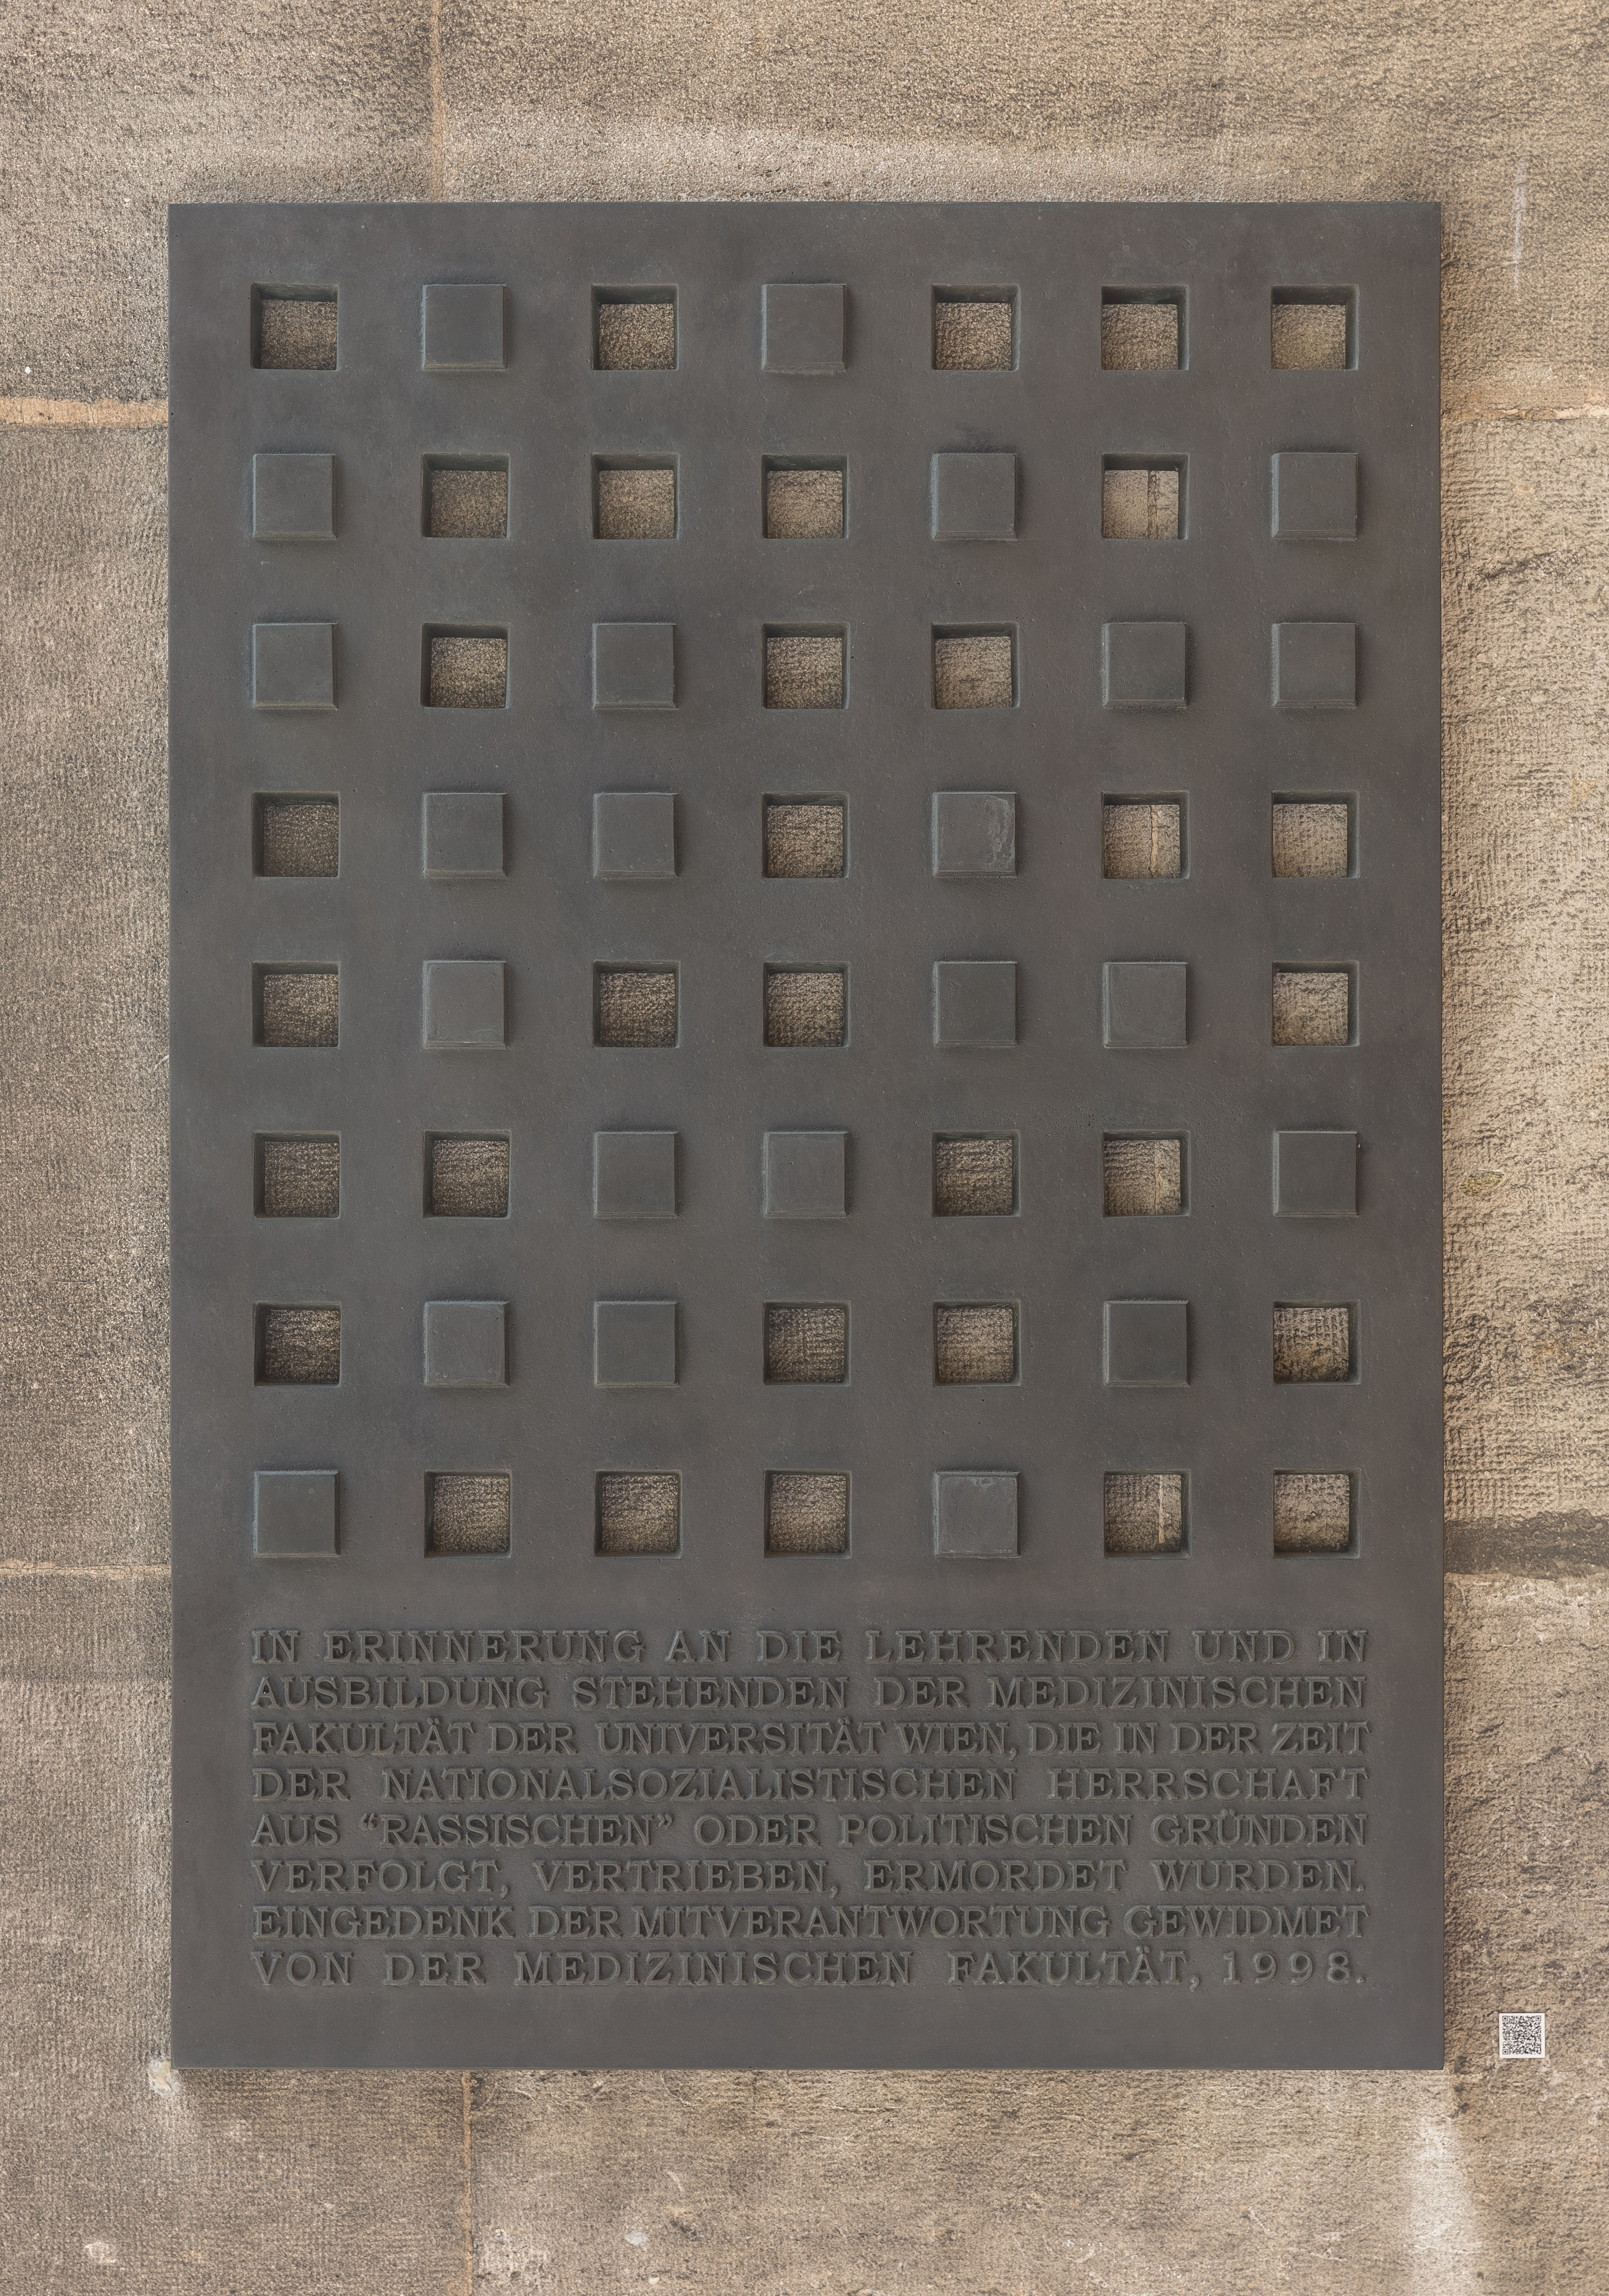 Plaque commemorating displaced members of the Medical Faculty 1938-1945, Nr. 123, in the Arkadenhof of the University of Vienna 3534.jpg